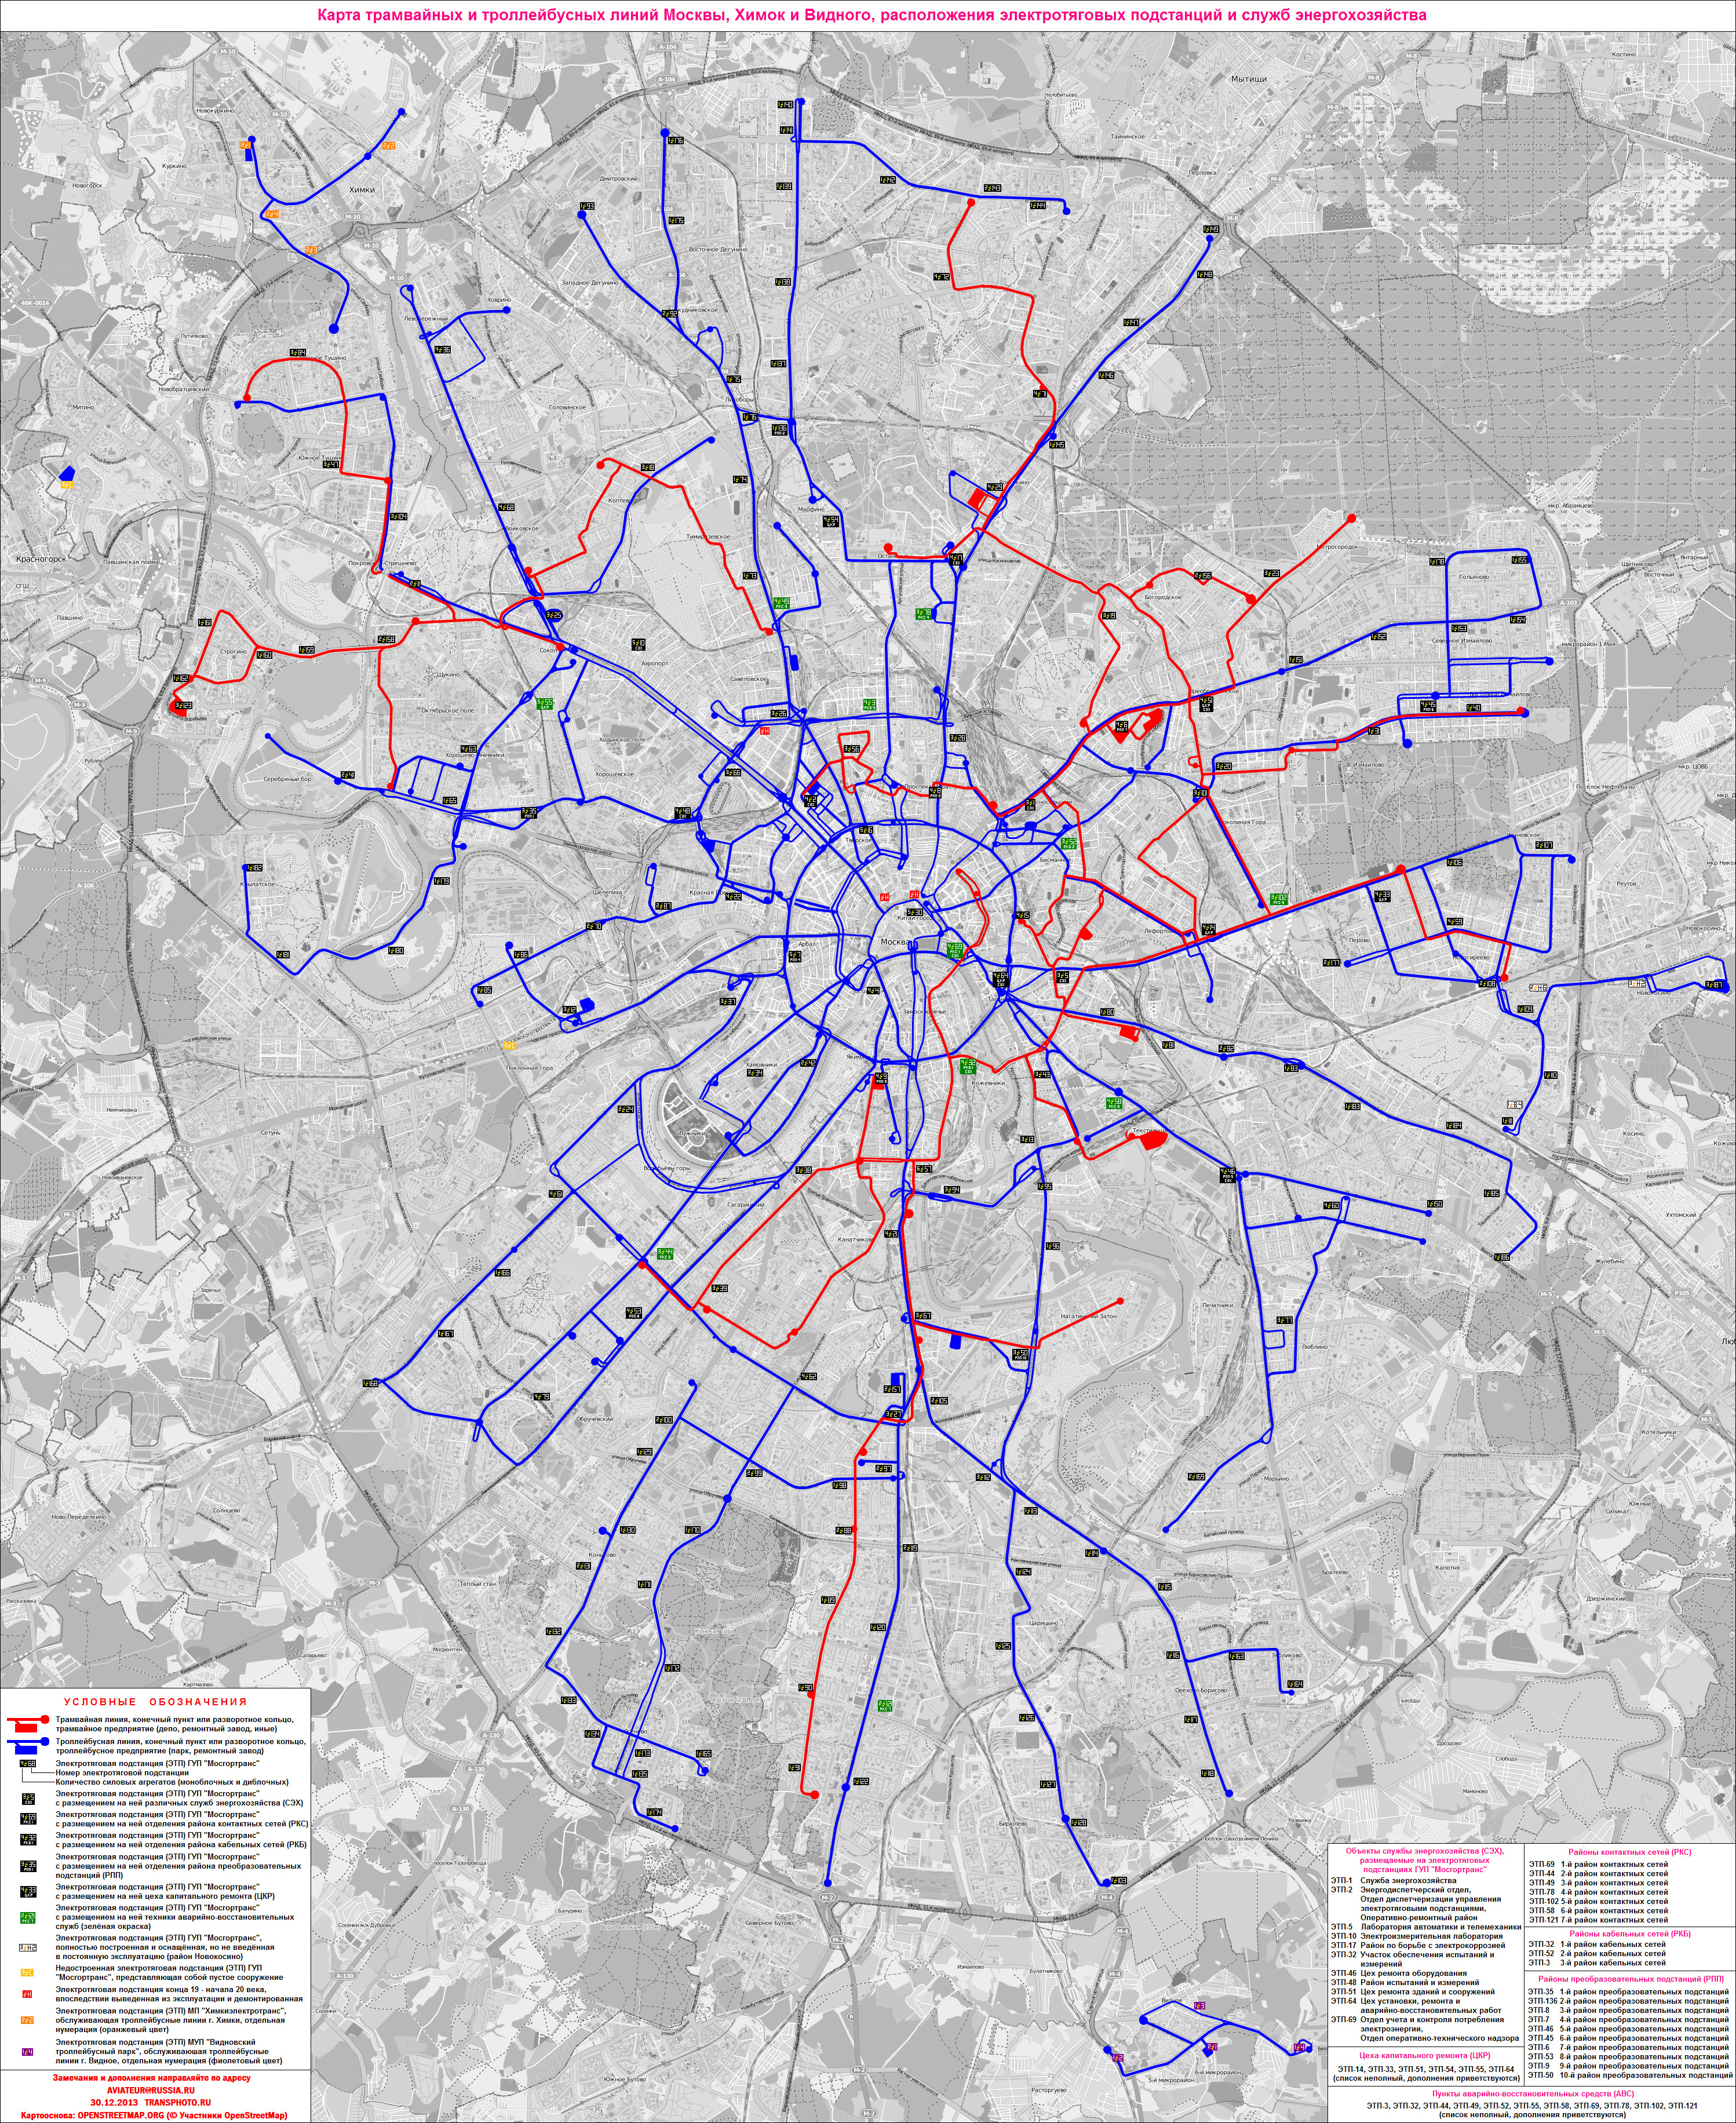 Moskva — Citywide Maps; Moskva — Electric power service — Traction electric station; Himki — Maps; Vidnoje — Maps; Moskva — Tramway and Trolleybus Infrastructure Maps